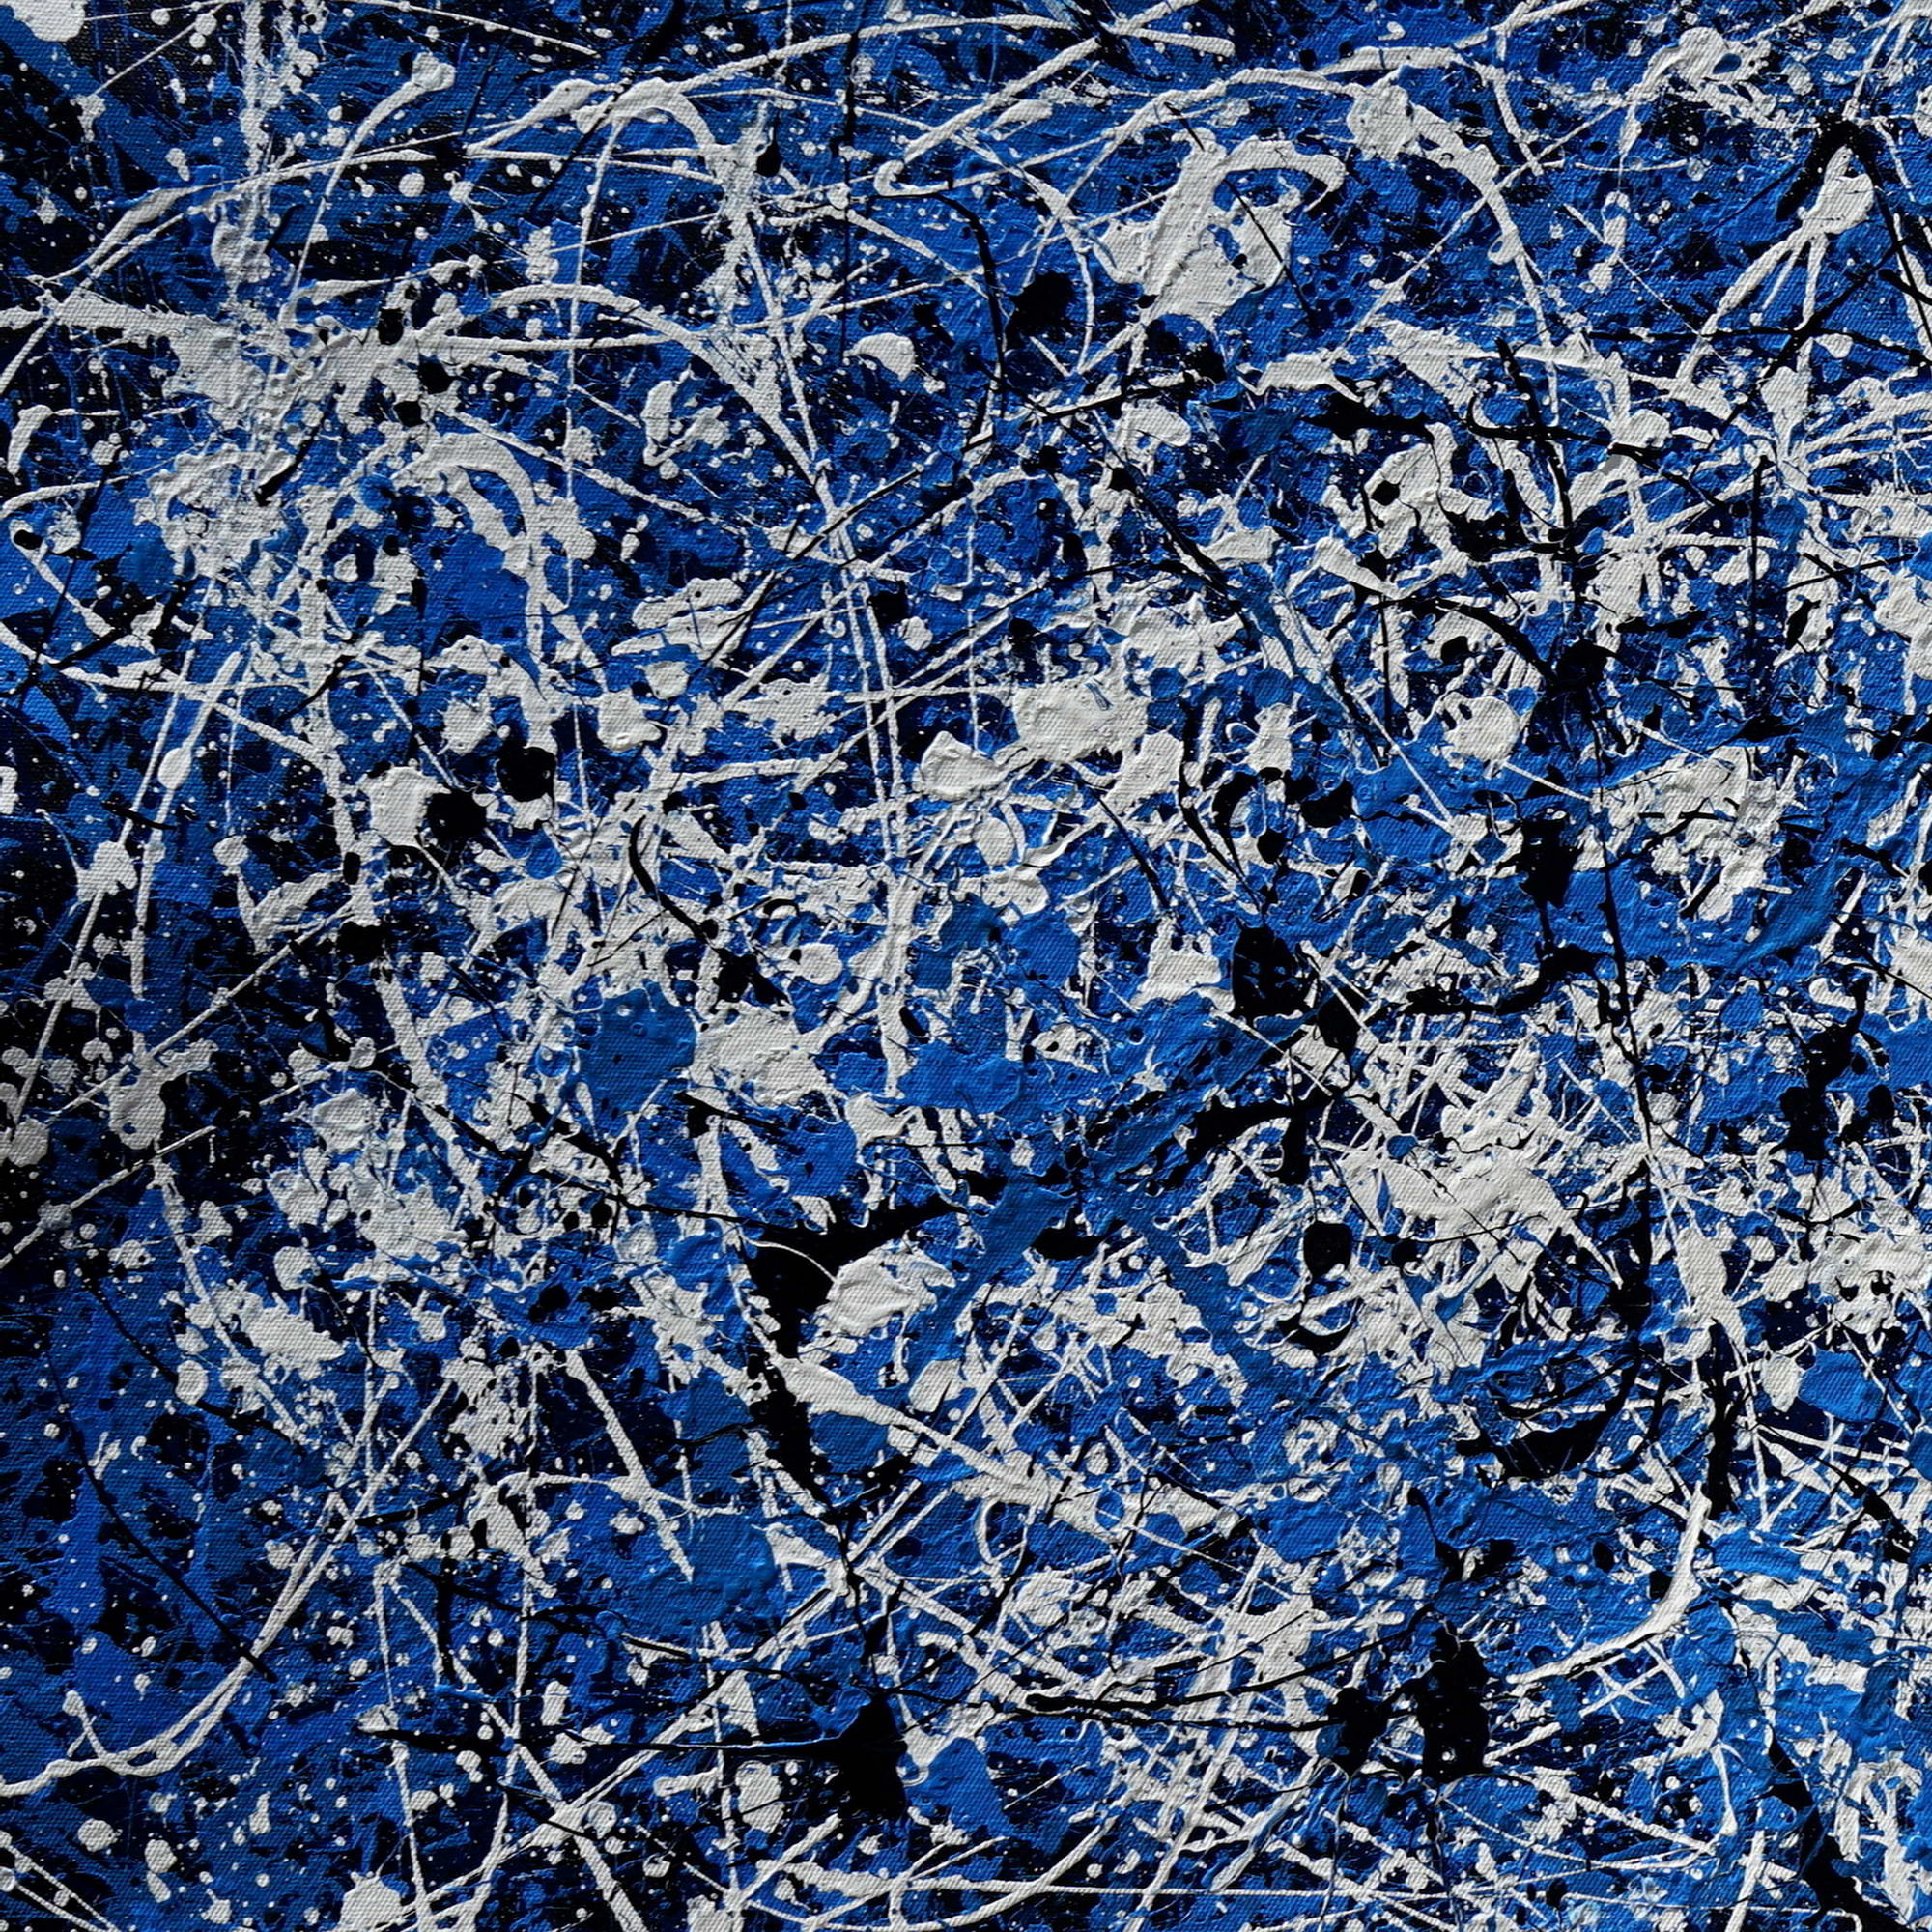 Hand painted Abstract Composition in Blue Pollock style 75x150cm